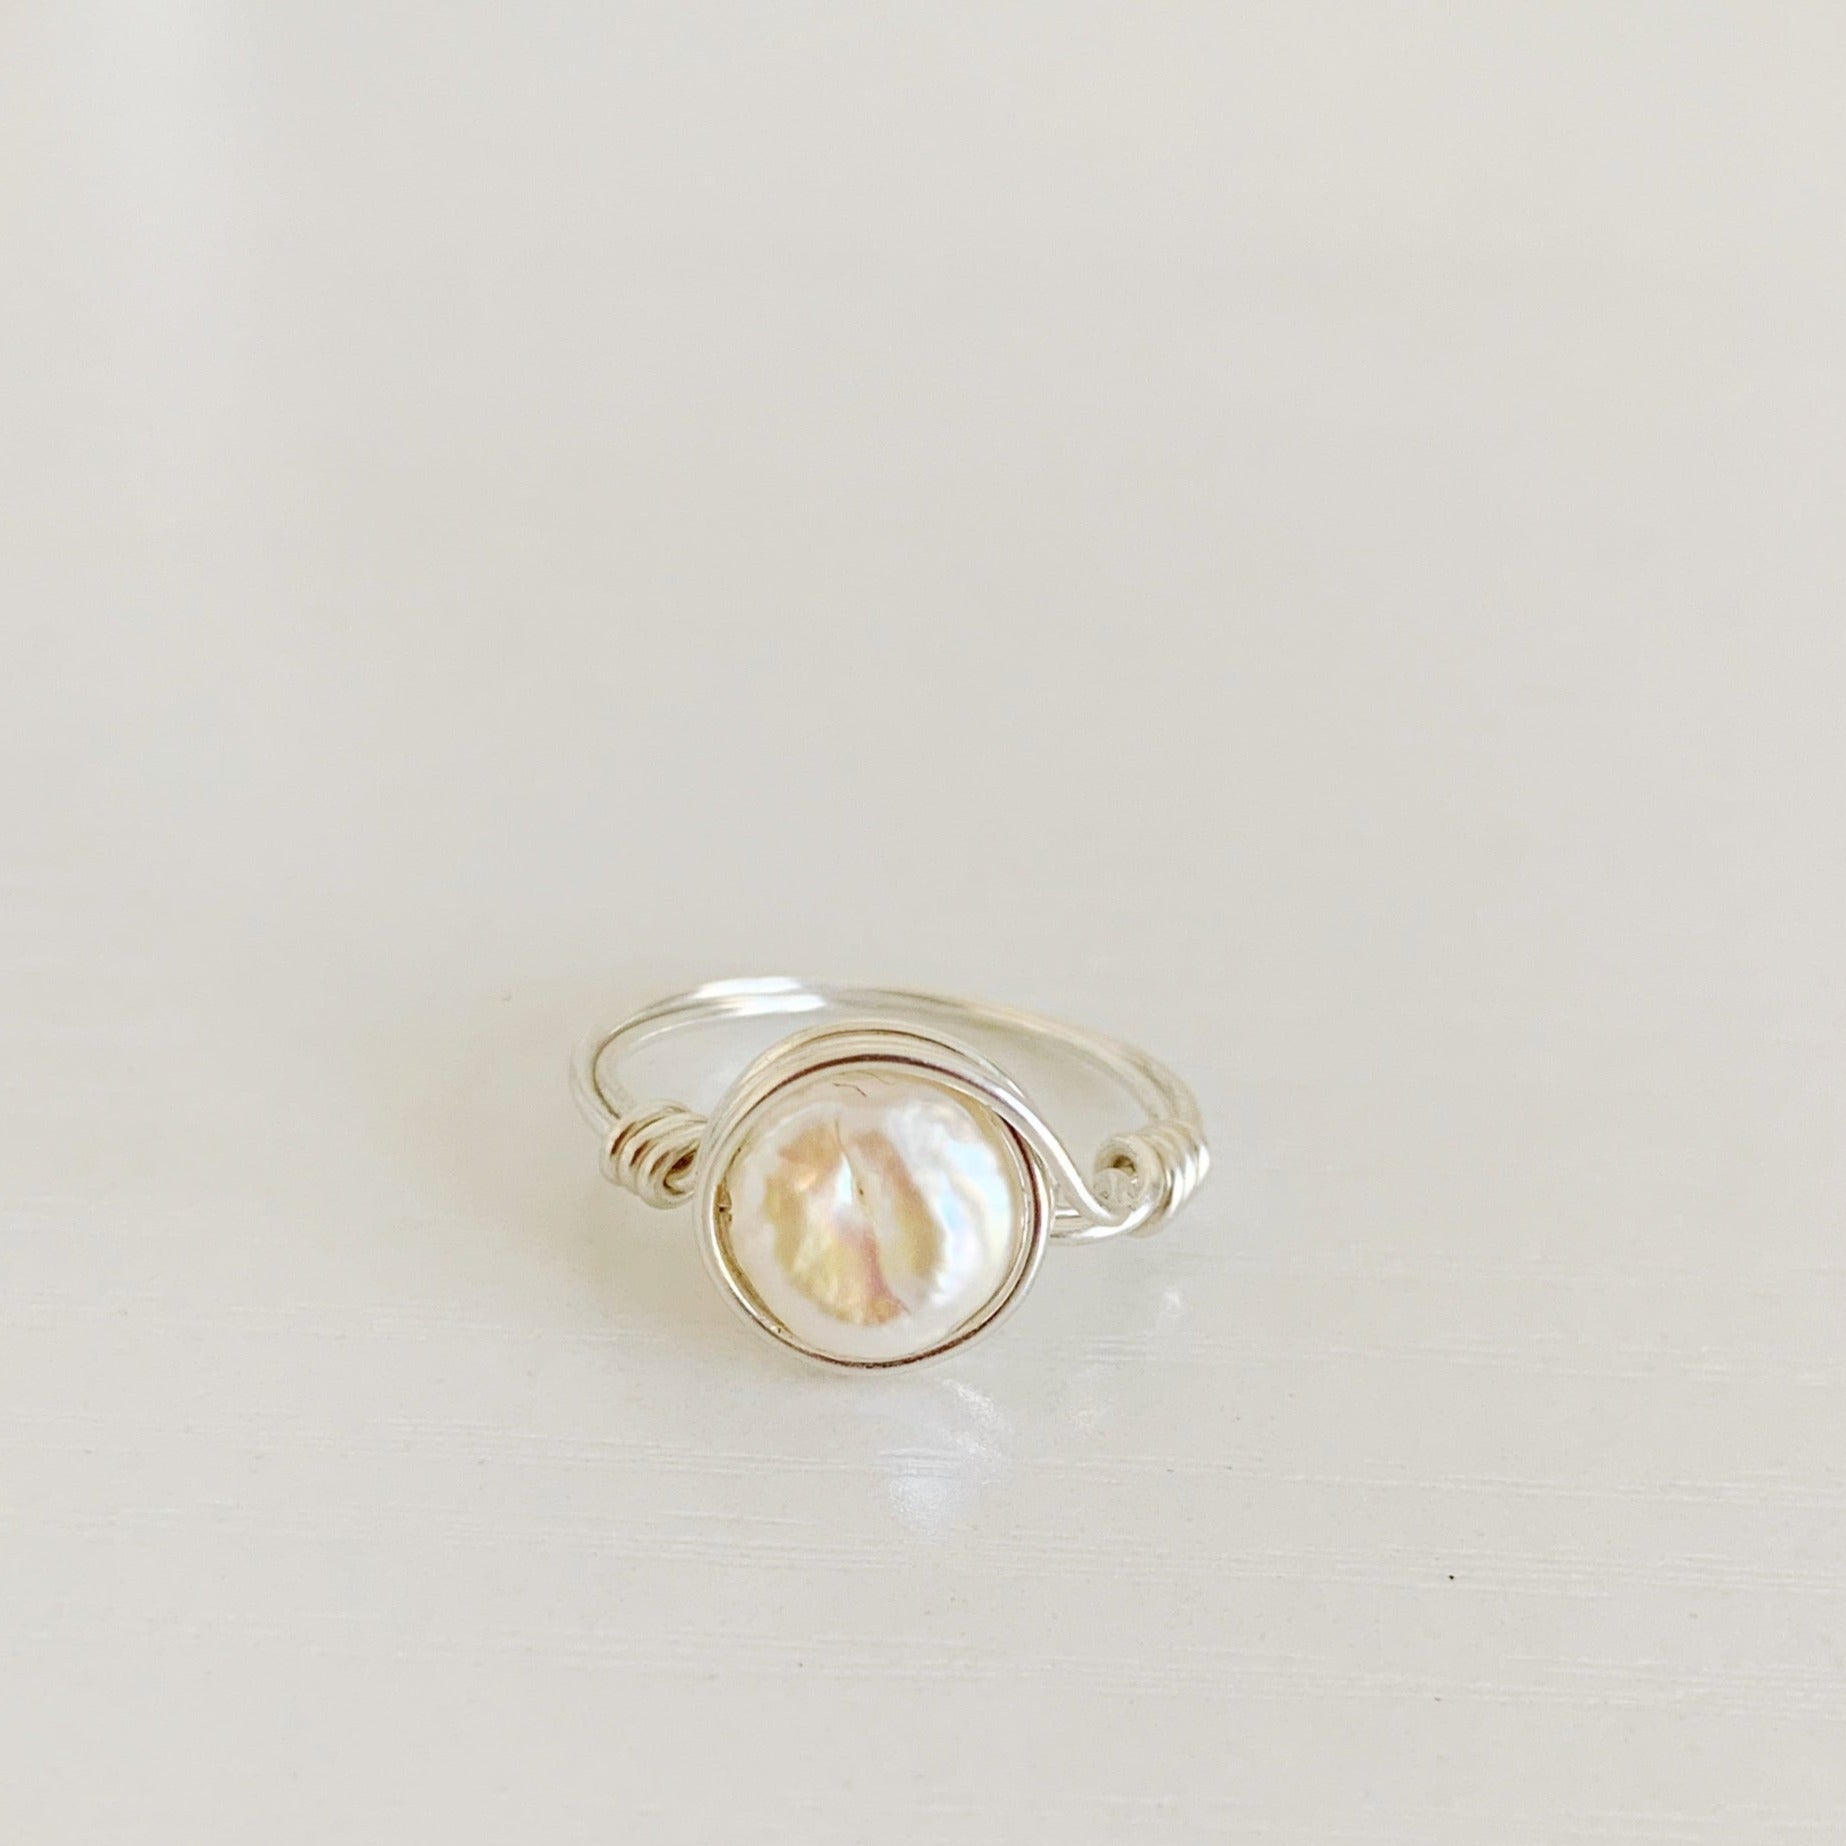 Newport Pearl Ring in sterling silver by mermaids and madeleines. this ring features a freshwater coin pearl and sterling silver wire. The ring is a wire wrap style making it simple and artful. this ring is photographed from a front view on a white surface